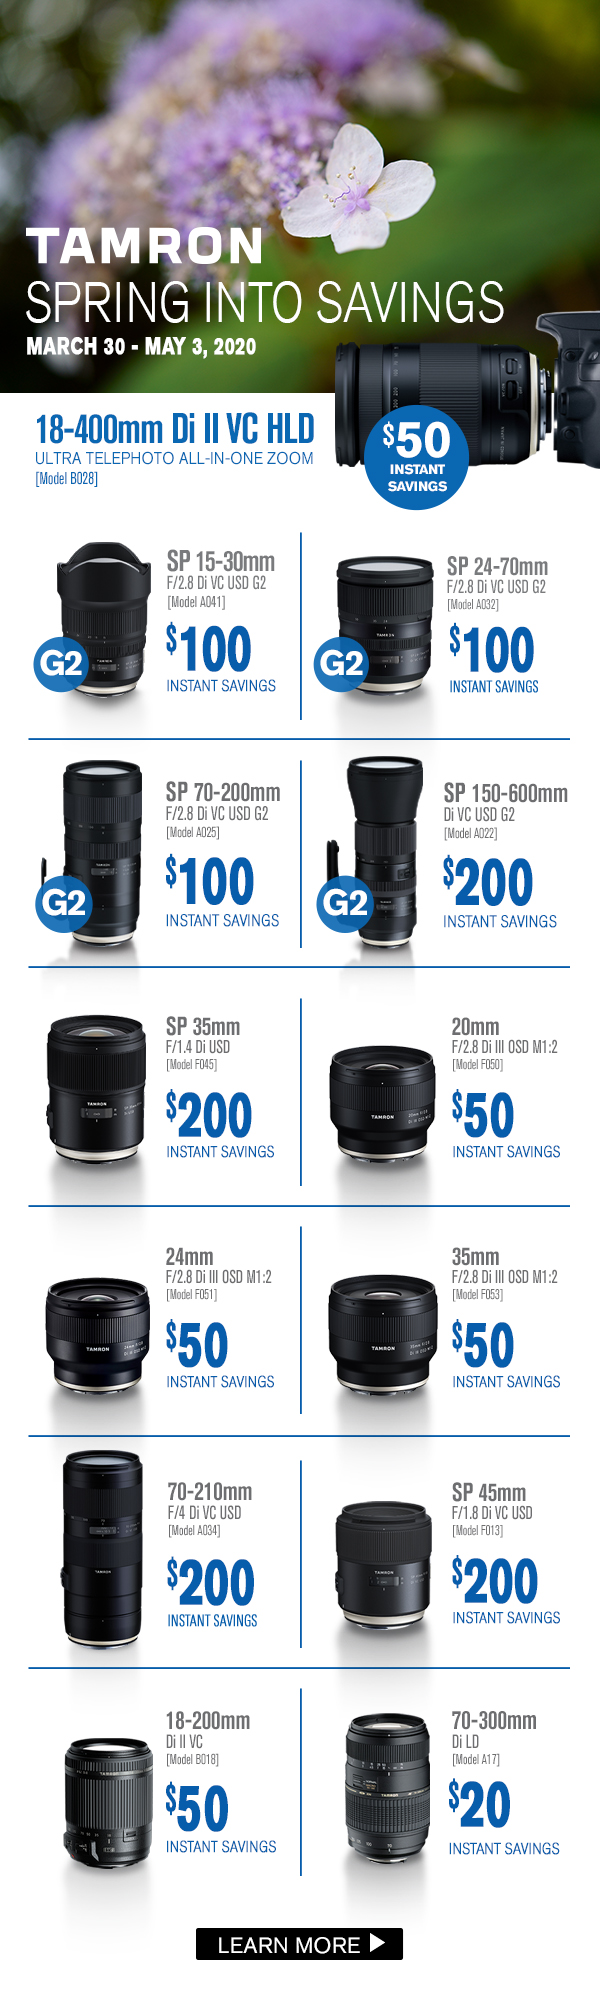 Tamron Spring into Savings (March 30th - May 3rd 2020)